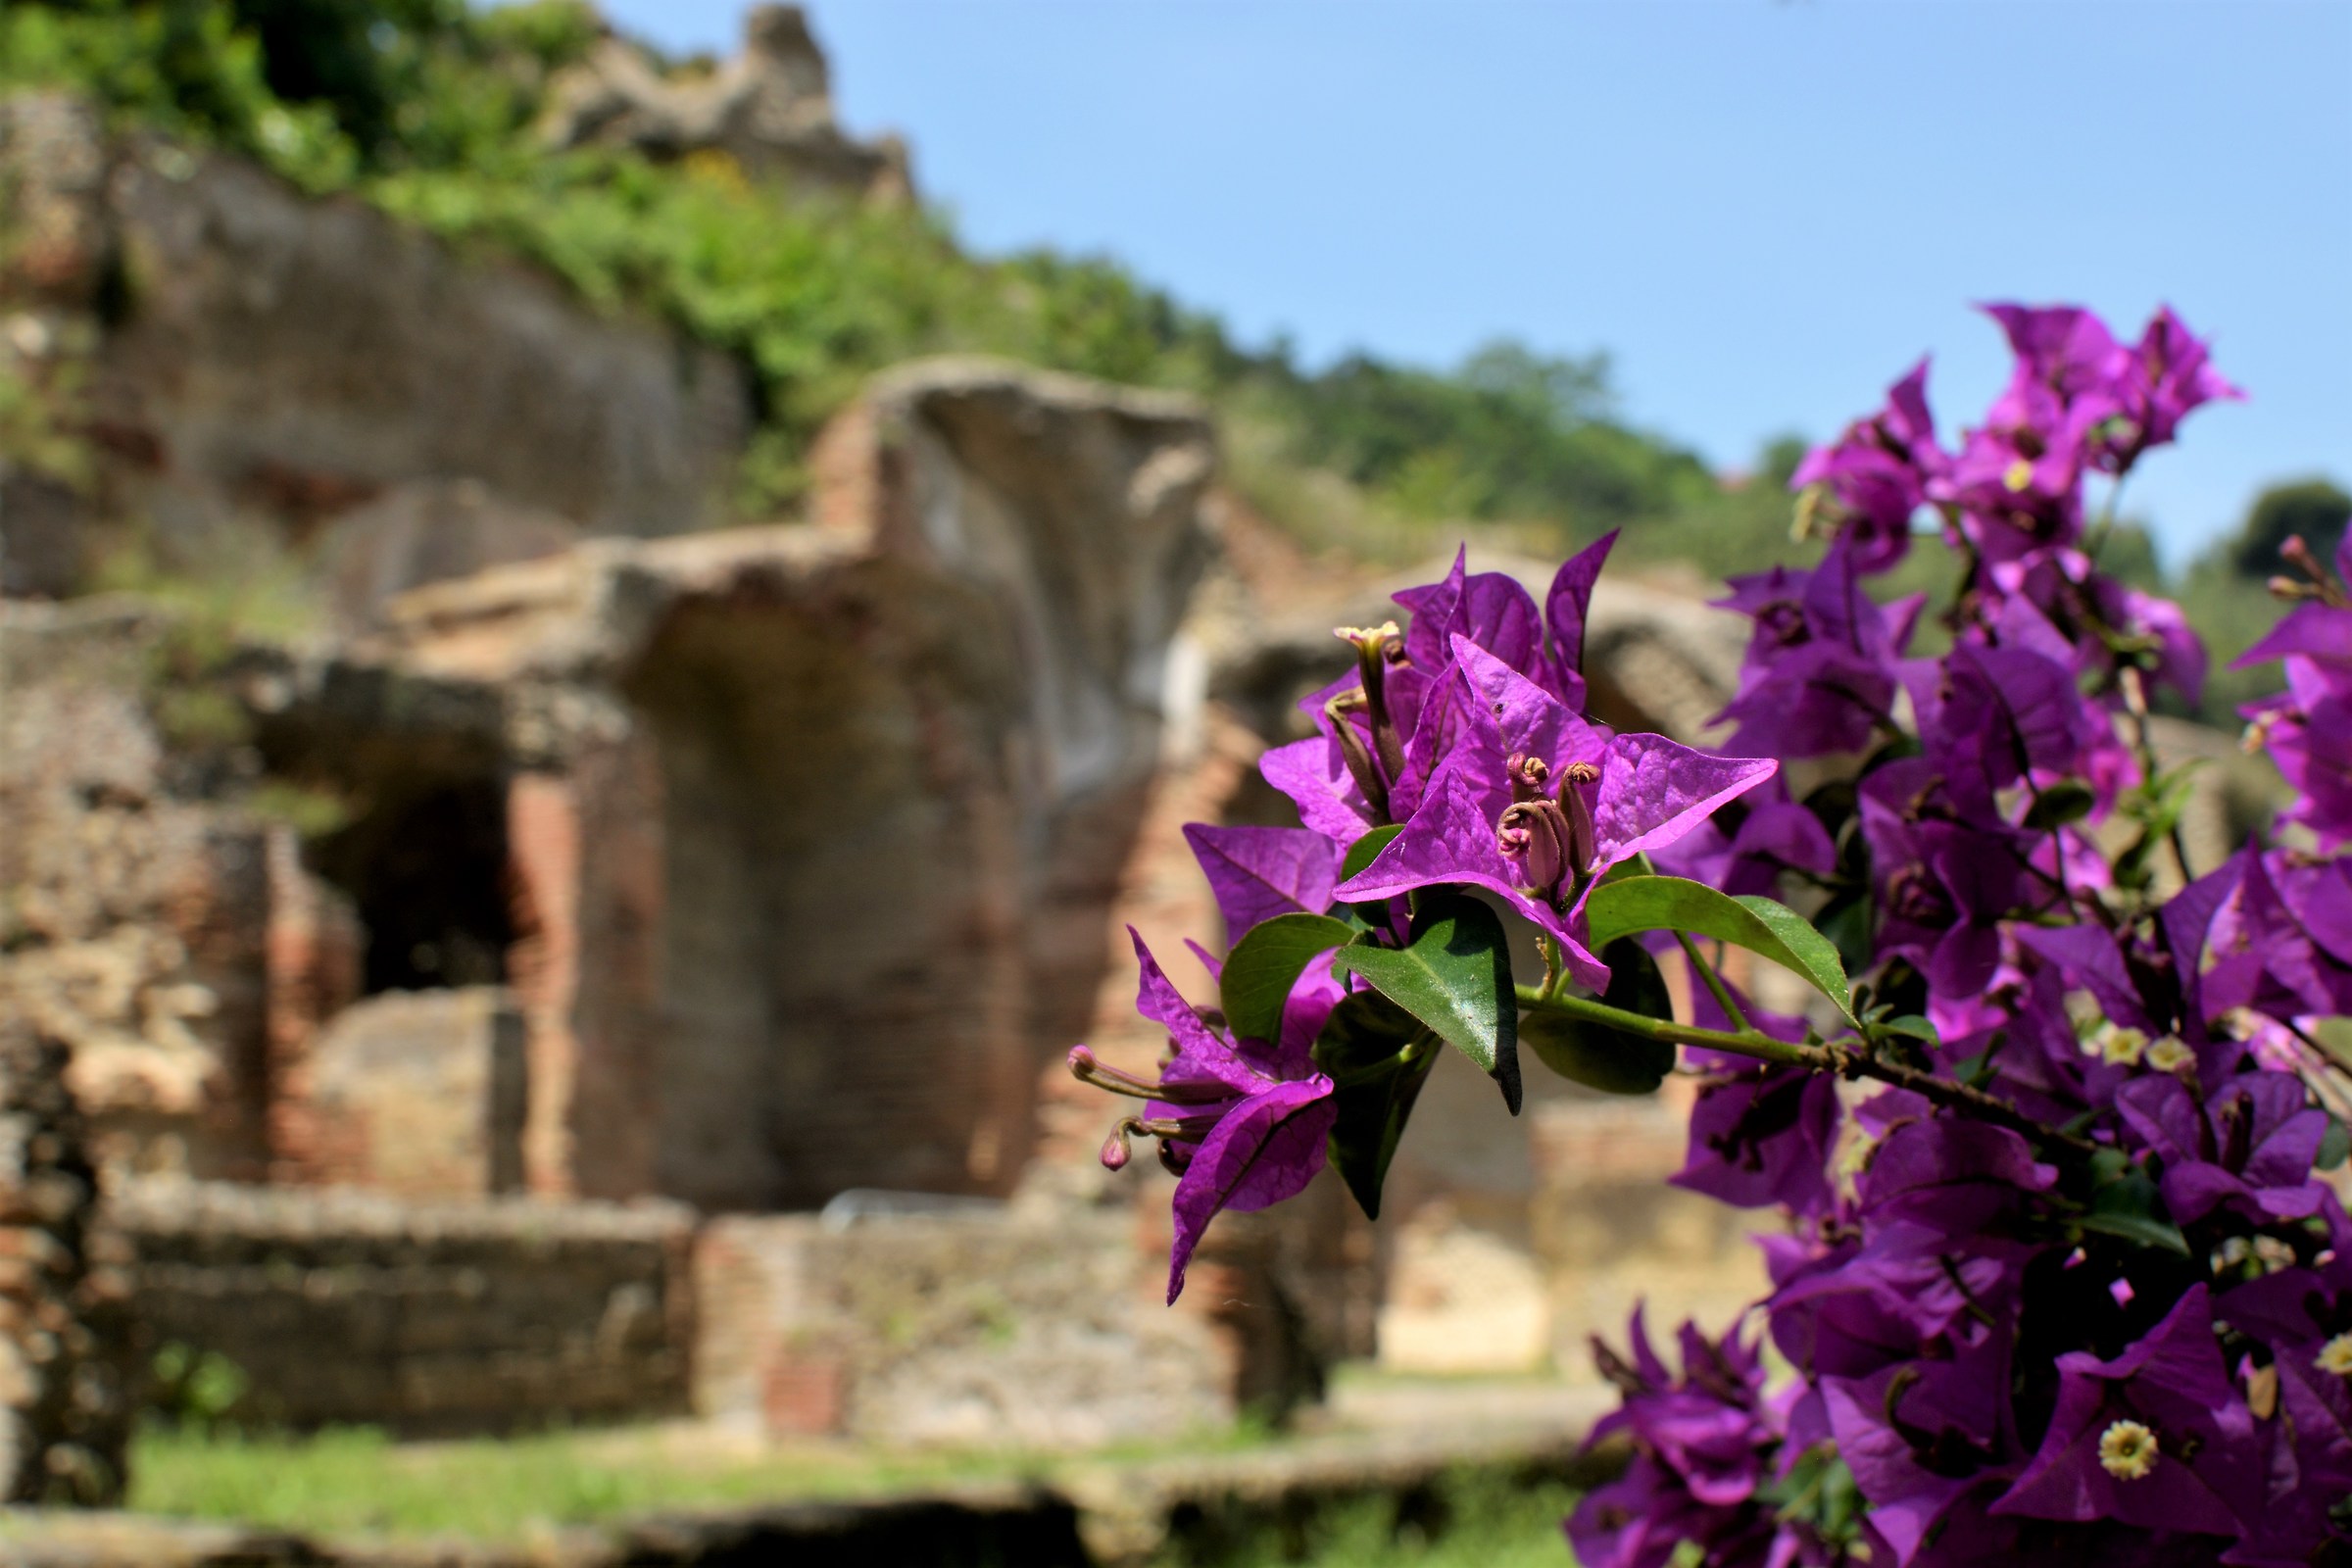 Flowers and archaeology...